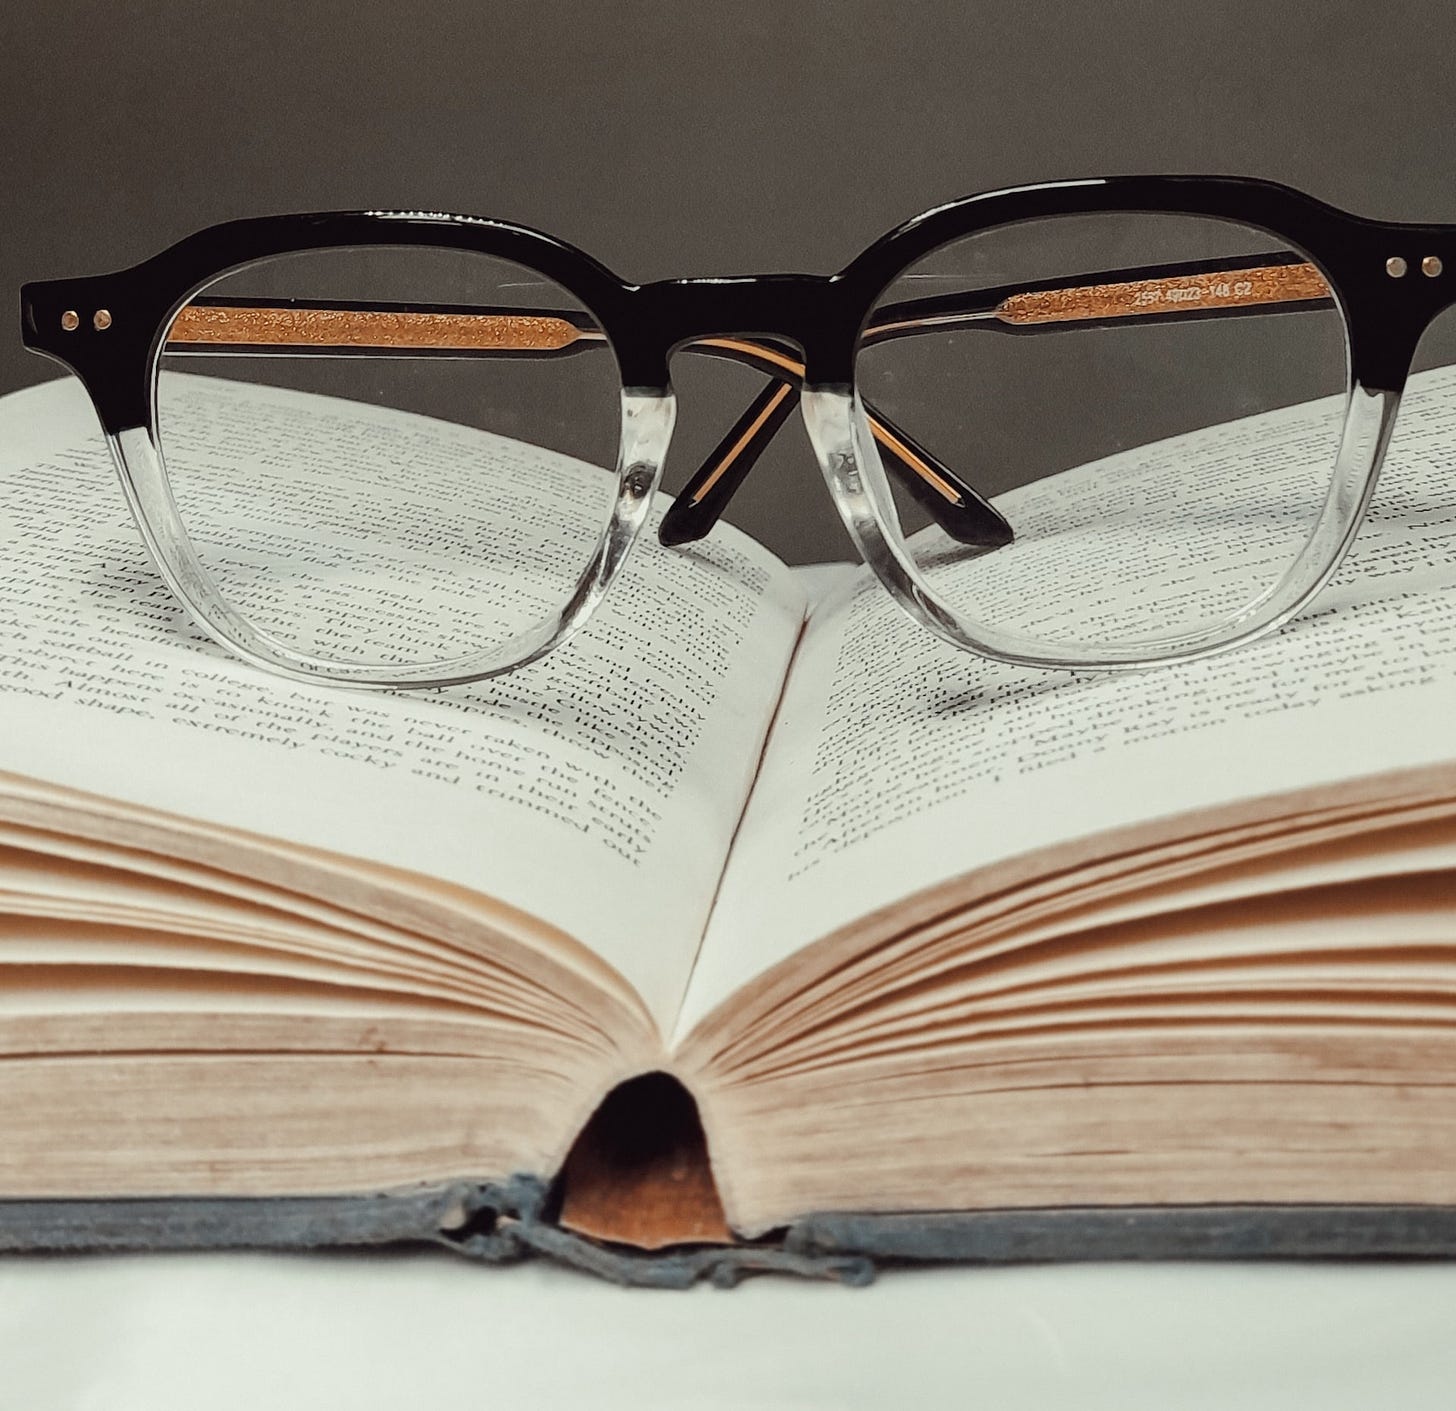 Glasses sitting on an open book